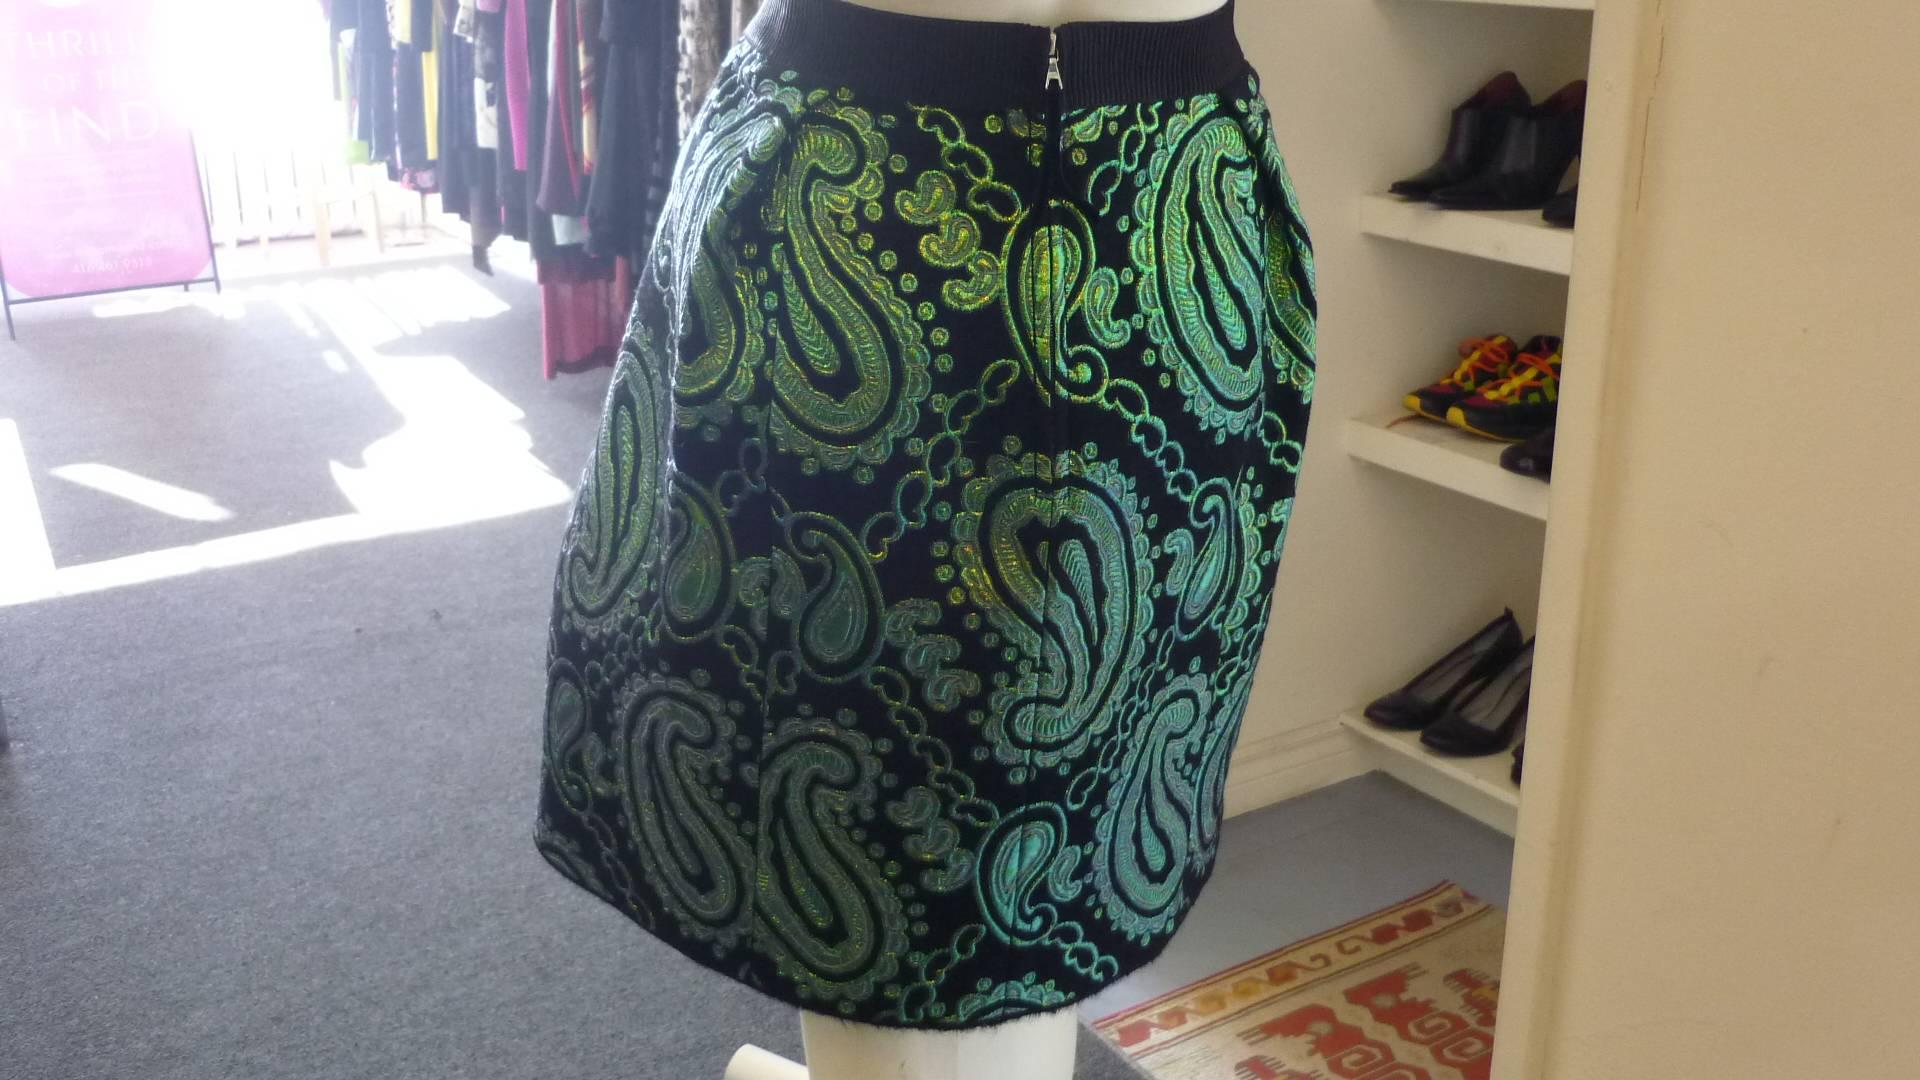 Superb skirt with a wide ribbed waist band, large paisley pattern and flaterring a-line shape.

Materials, italian made, are wool/acrylic/silk.nylon. Exposed zip closure with lanyard is at the back.